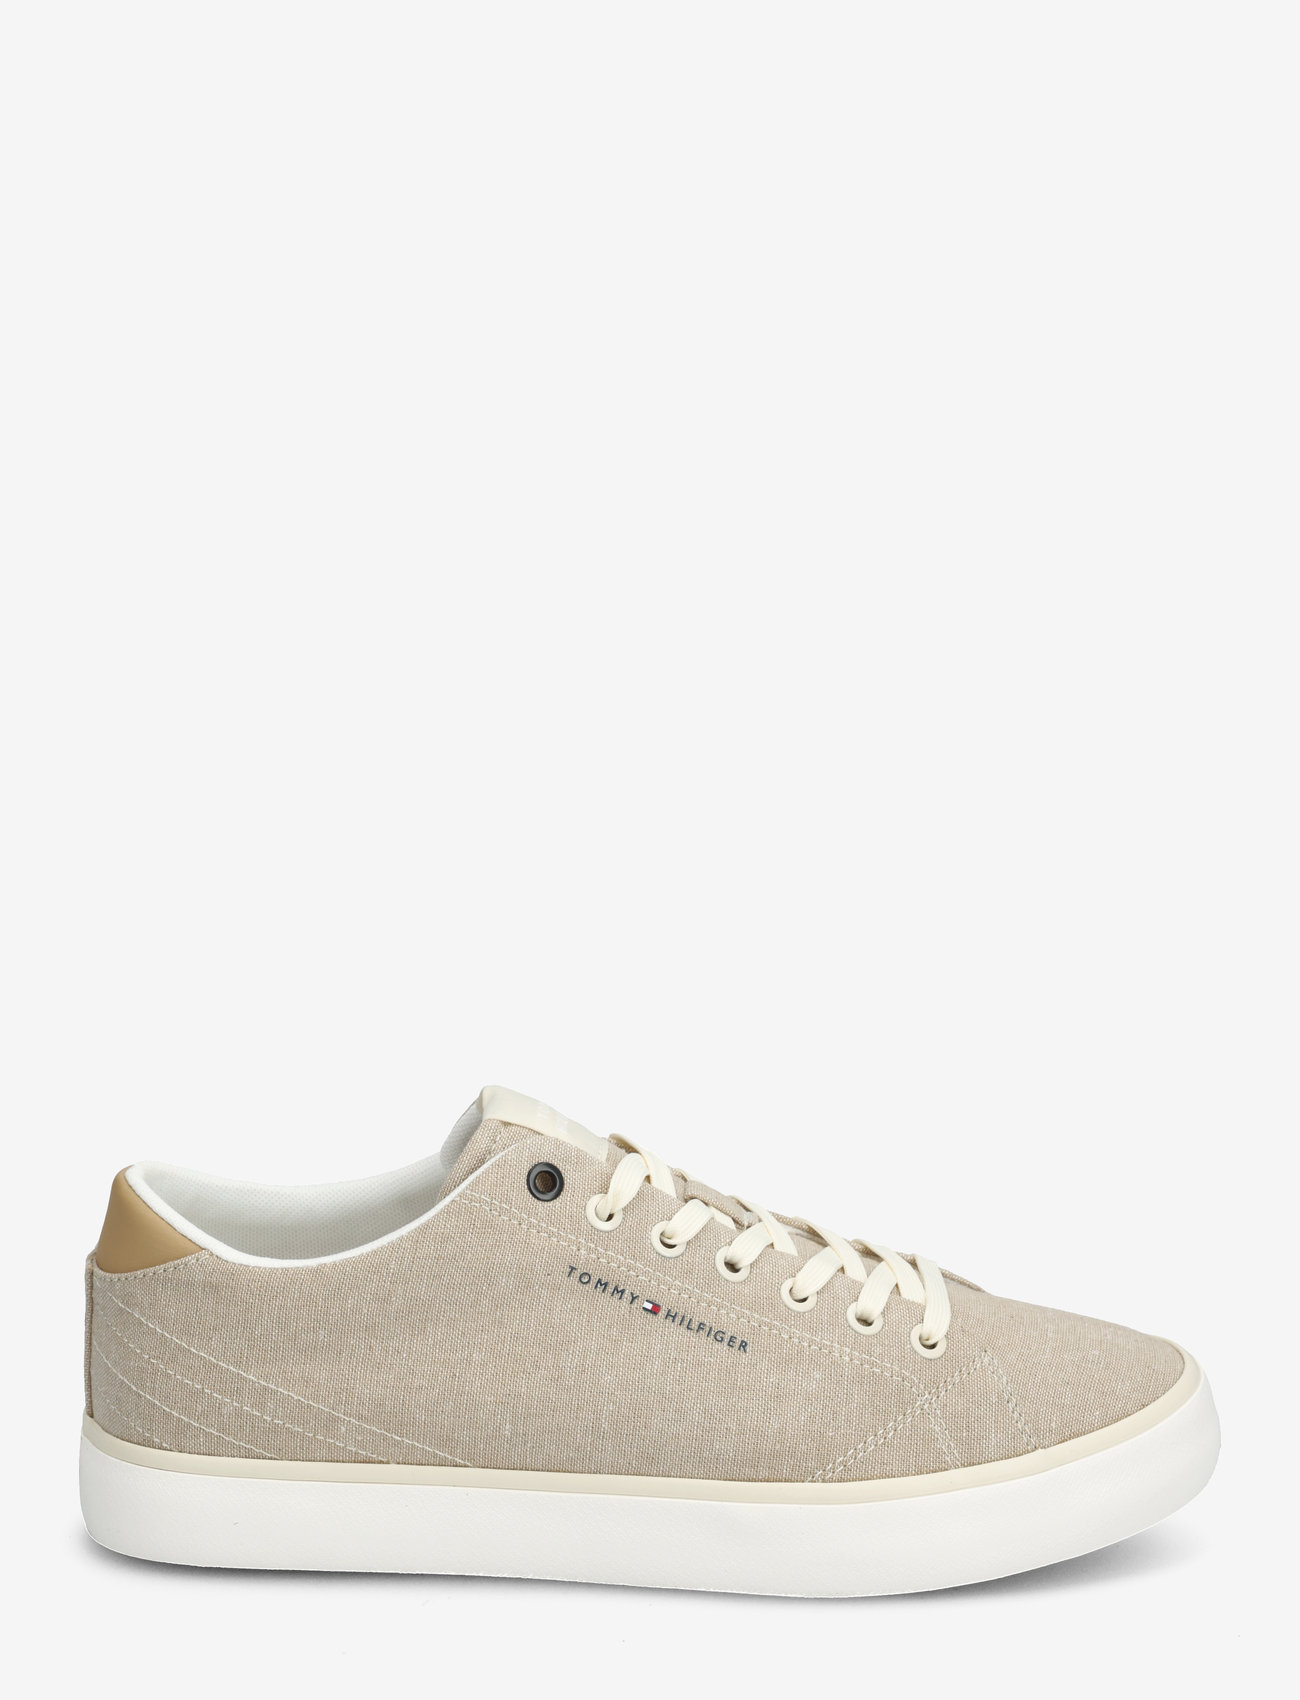 Tommy Hilfiger - TH HI VULC LOW CHAMBRAY - lave sneakers - calico - 1